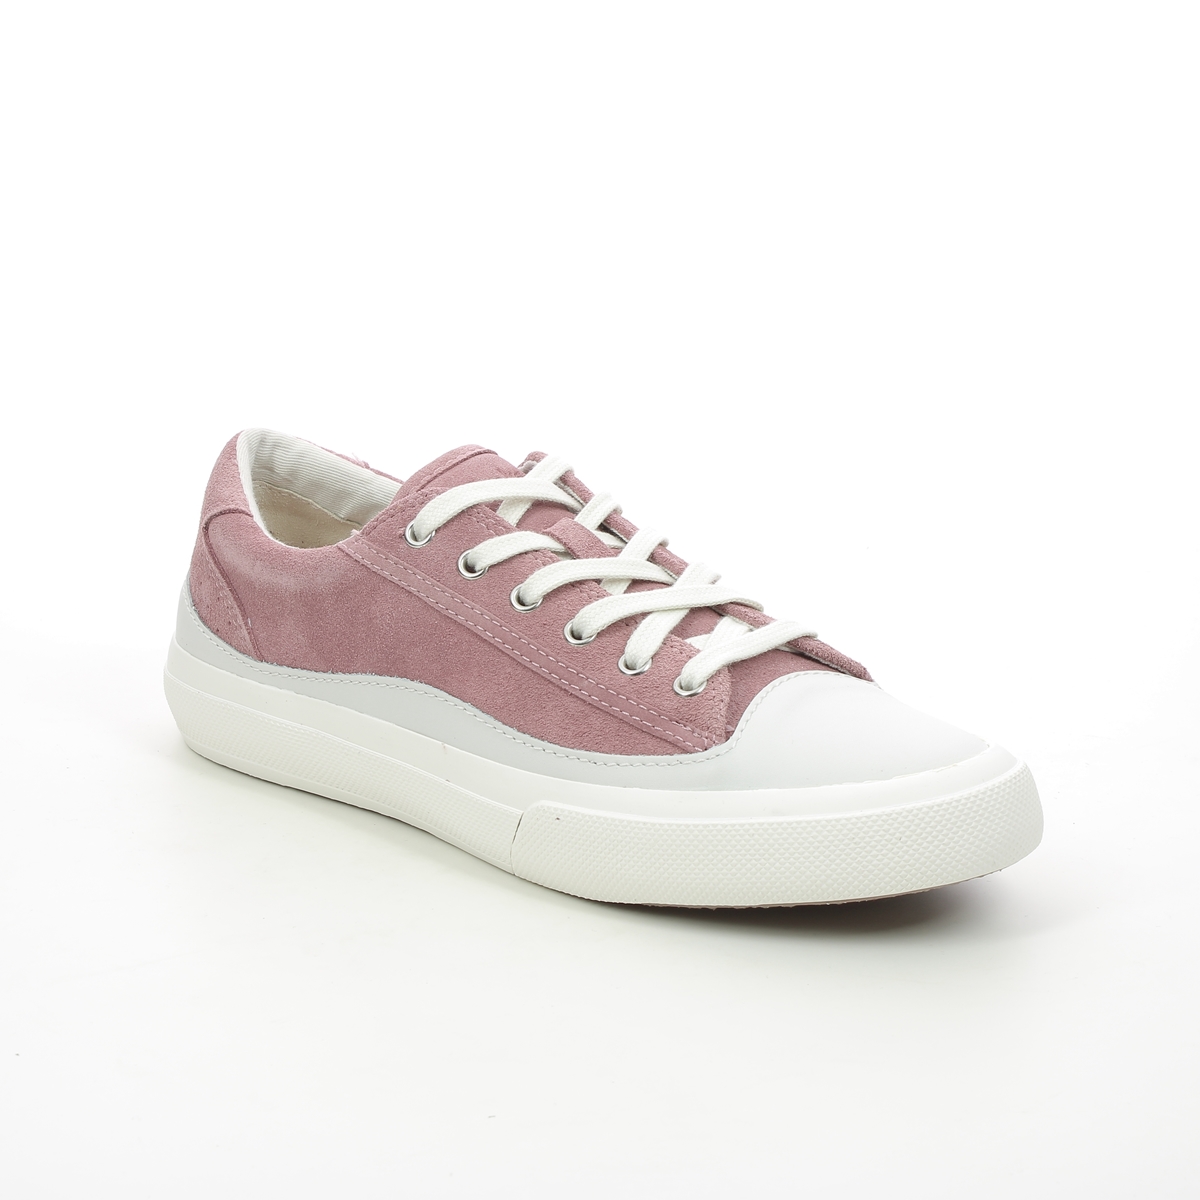 Clarks Aceley Lace Rose pink Womens trainers 6092-94D in a Plain Leather in Size 4